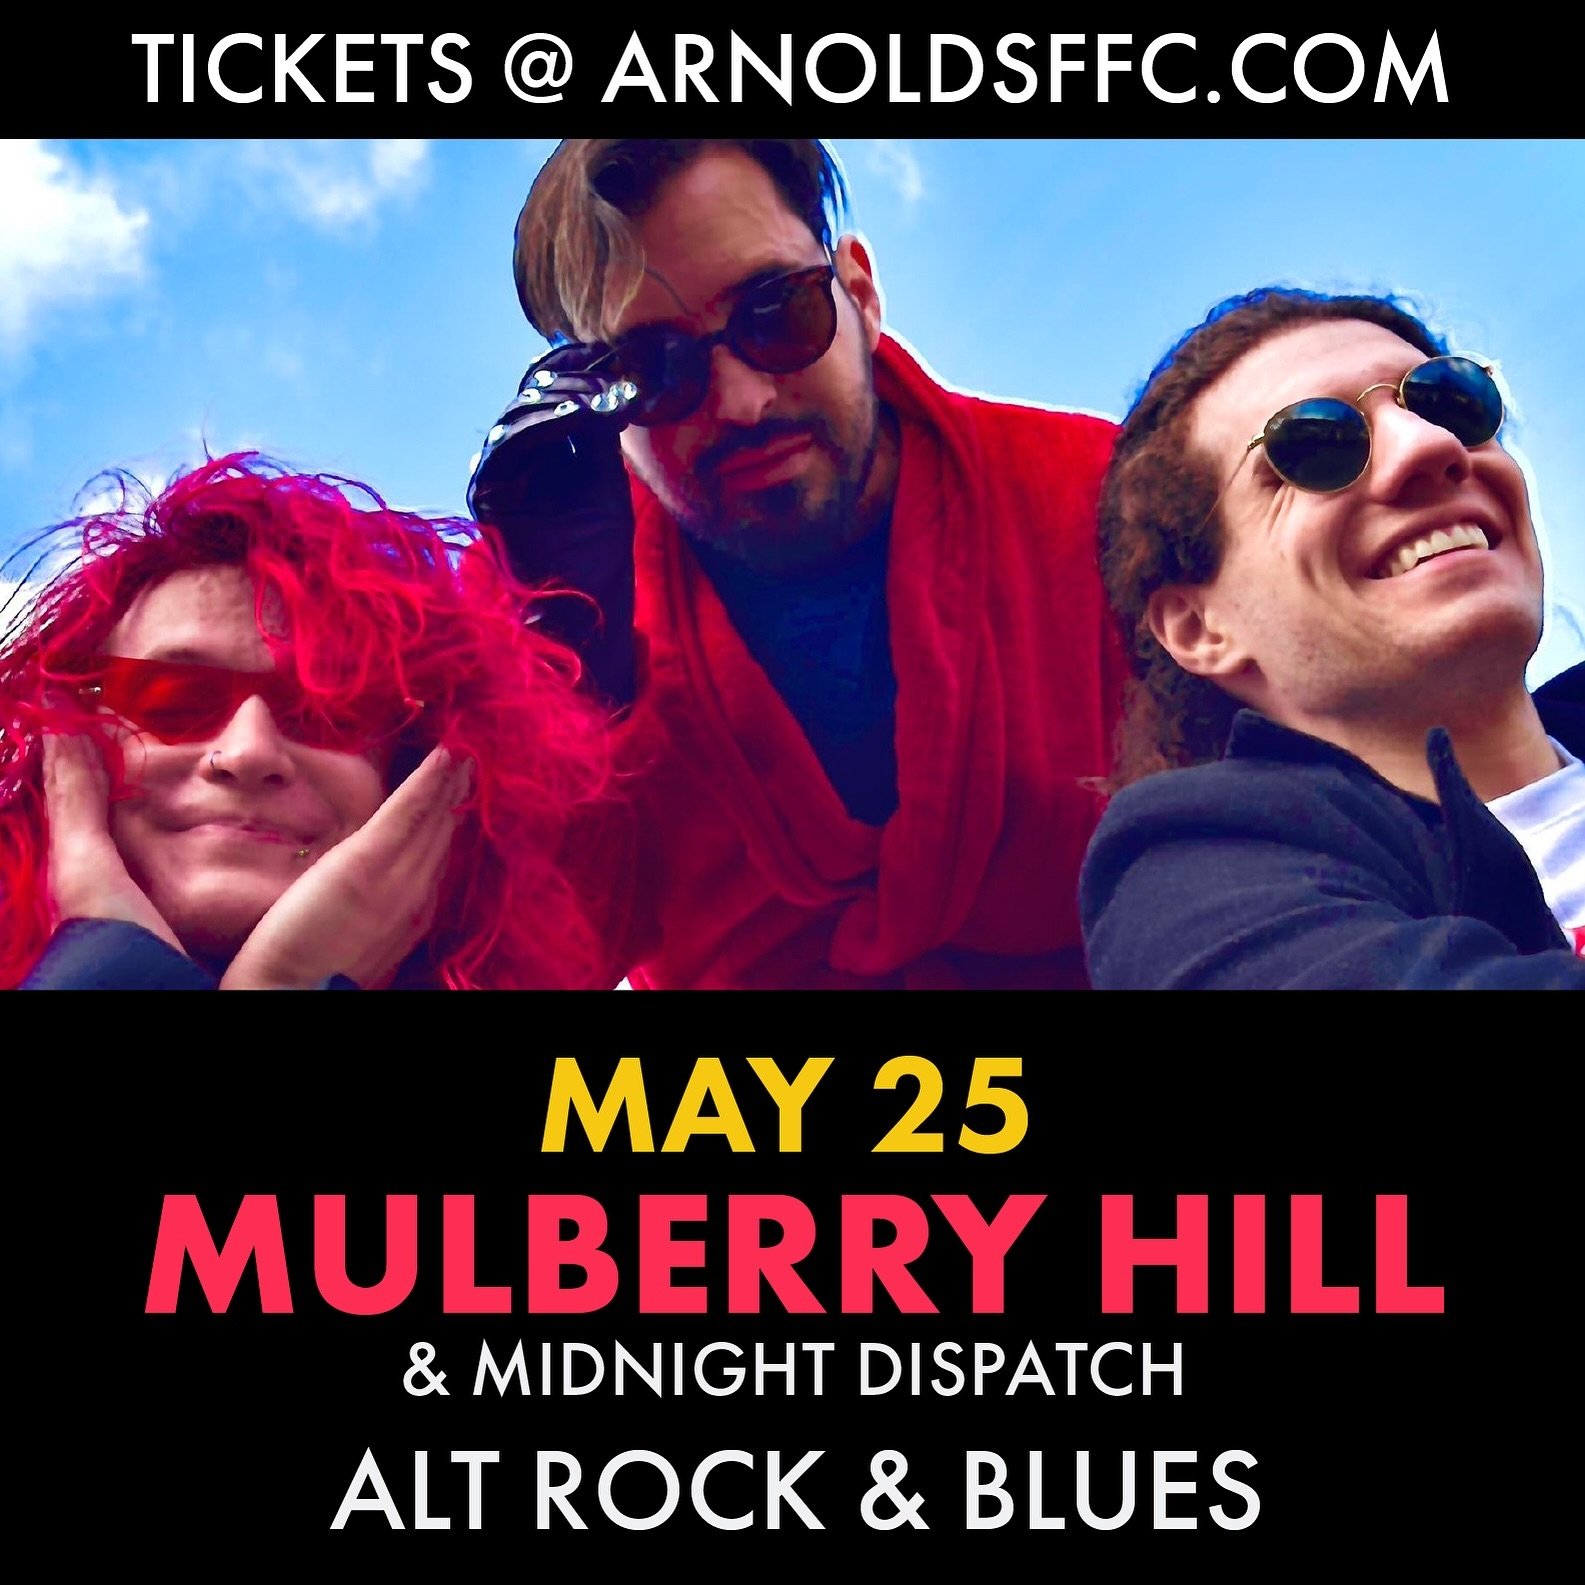 @therealmulberryhill Mulberry Hill, an indie alt rock band with a signature GarageBand sound, is making their first debut at the Water Tower on May 25th! 🎟️Get tickets at ArnoldsFFC.com! Come on down and rock out and hear some killer originals such 